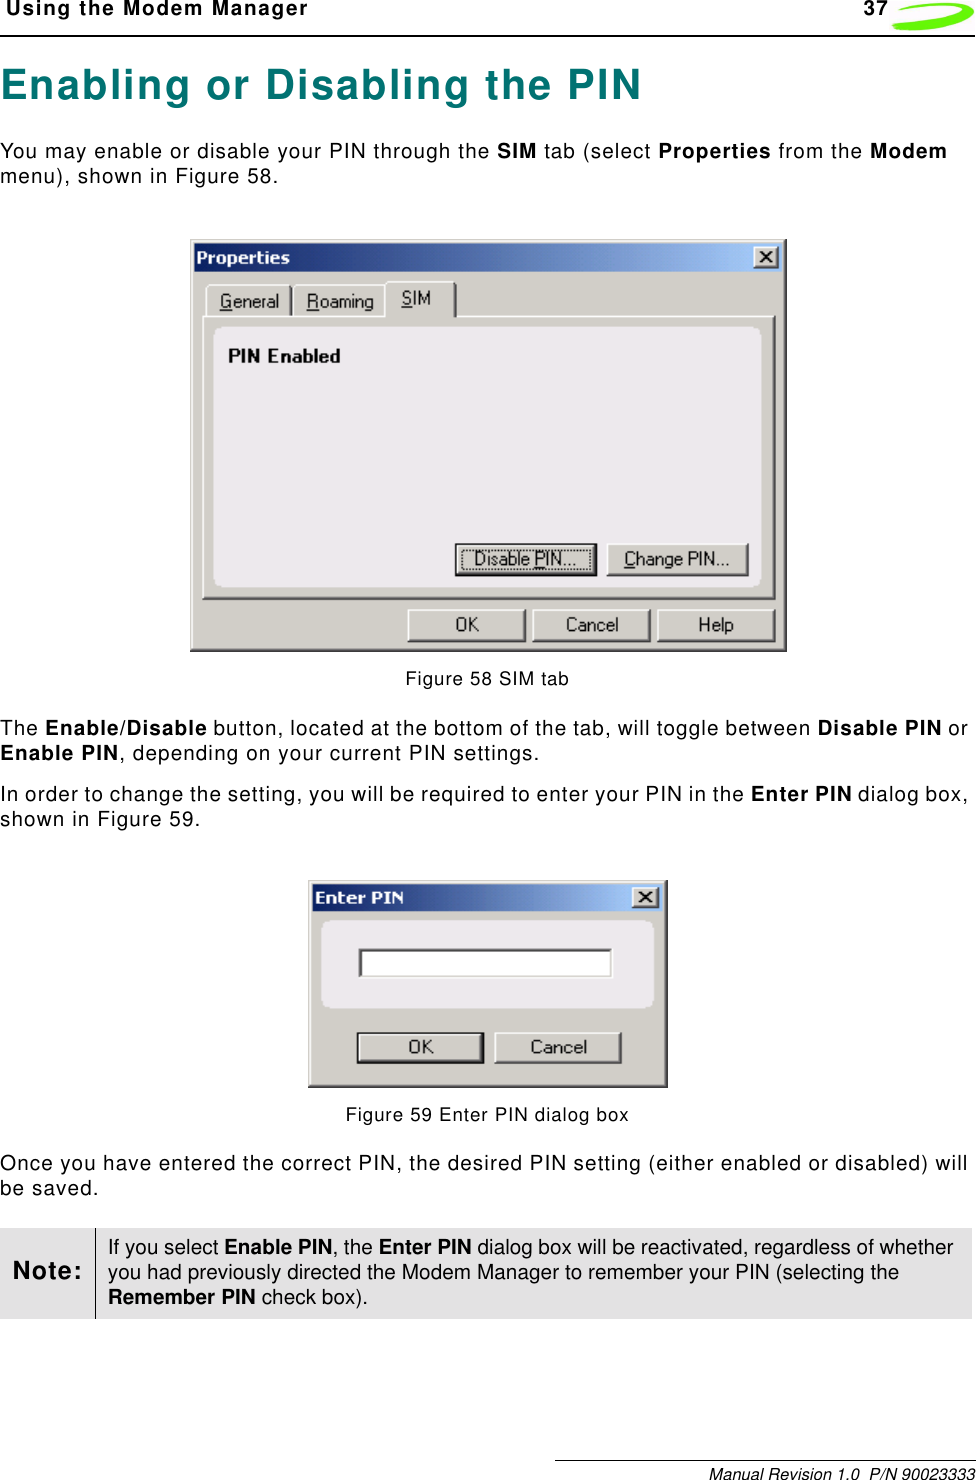  Using the Modem Manager 37Manual Revision 1.0  P/N 90023333Enabling or Disabling the PINYou may enable or disable your PIN through the SIM tab (select Properties from the Modem menu), shown in Figure 58.Figure 58 SIM tabThe Enable/Disable button, located at the bottom of the tab, will toggle between Disable PIN or Enable PIN, depending on your current PIN settings.In order to change the setting, you will be required to enter your PIN in the Enter PIN dialog box, shown in Figure 59.Figure 59 Enter PIN dialog boxOnce you have entered the correct PIN, the desired PIN setting (either enabled or disabled) will be saved.Note: If you select Enable PIN, the Enter PIN dialog box will be reactivated, regardless of whether you had previously directed the Modem Manager to remember your PIN (selecting the Remember PIN check box).